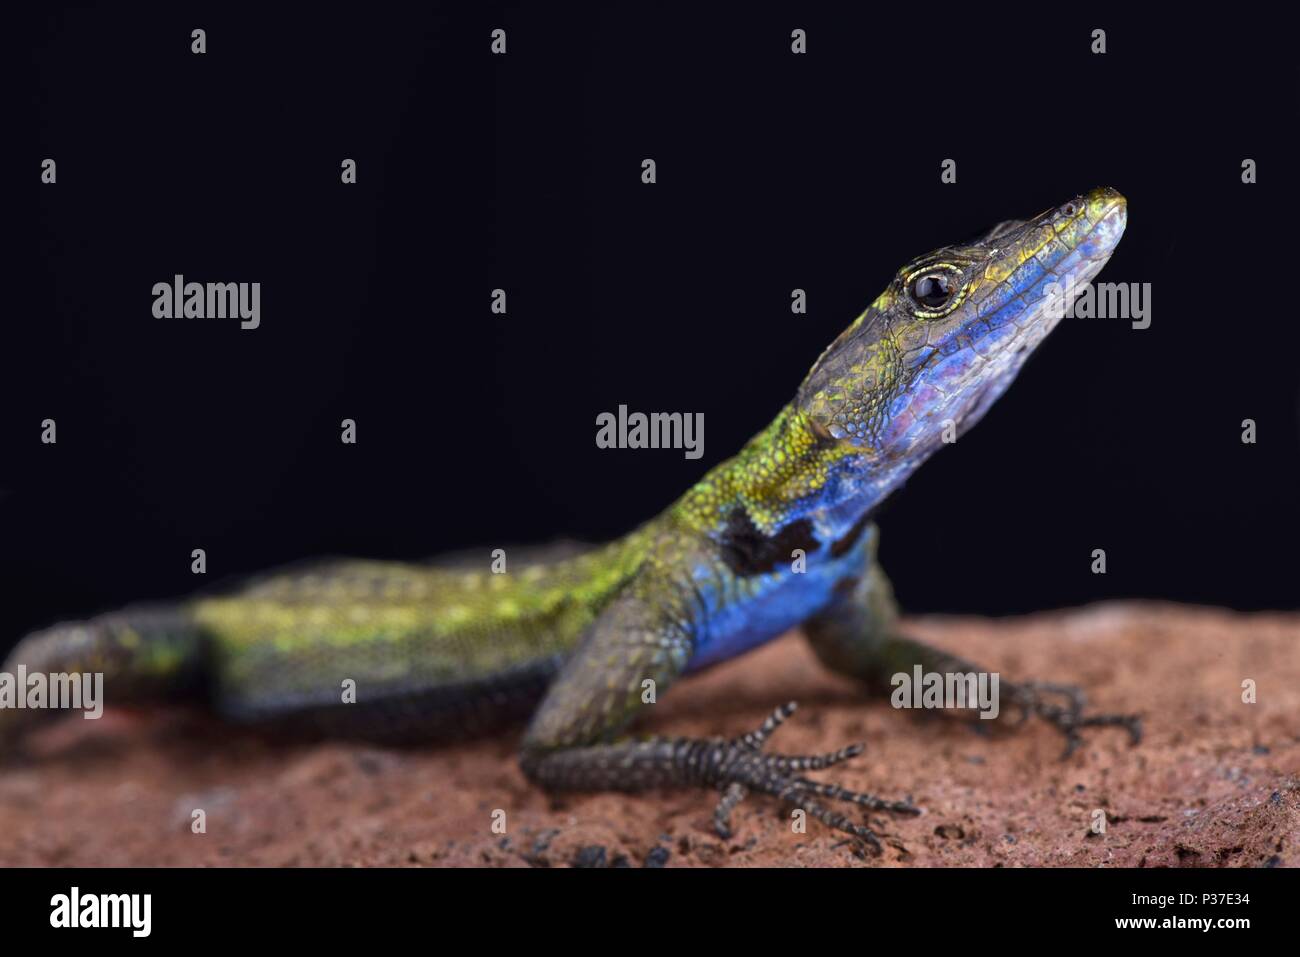 The Mozambique flat lizard (Platysaurus intermedius nyasae) is found in Malawi and central Mozambique. Stock Photo